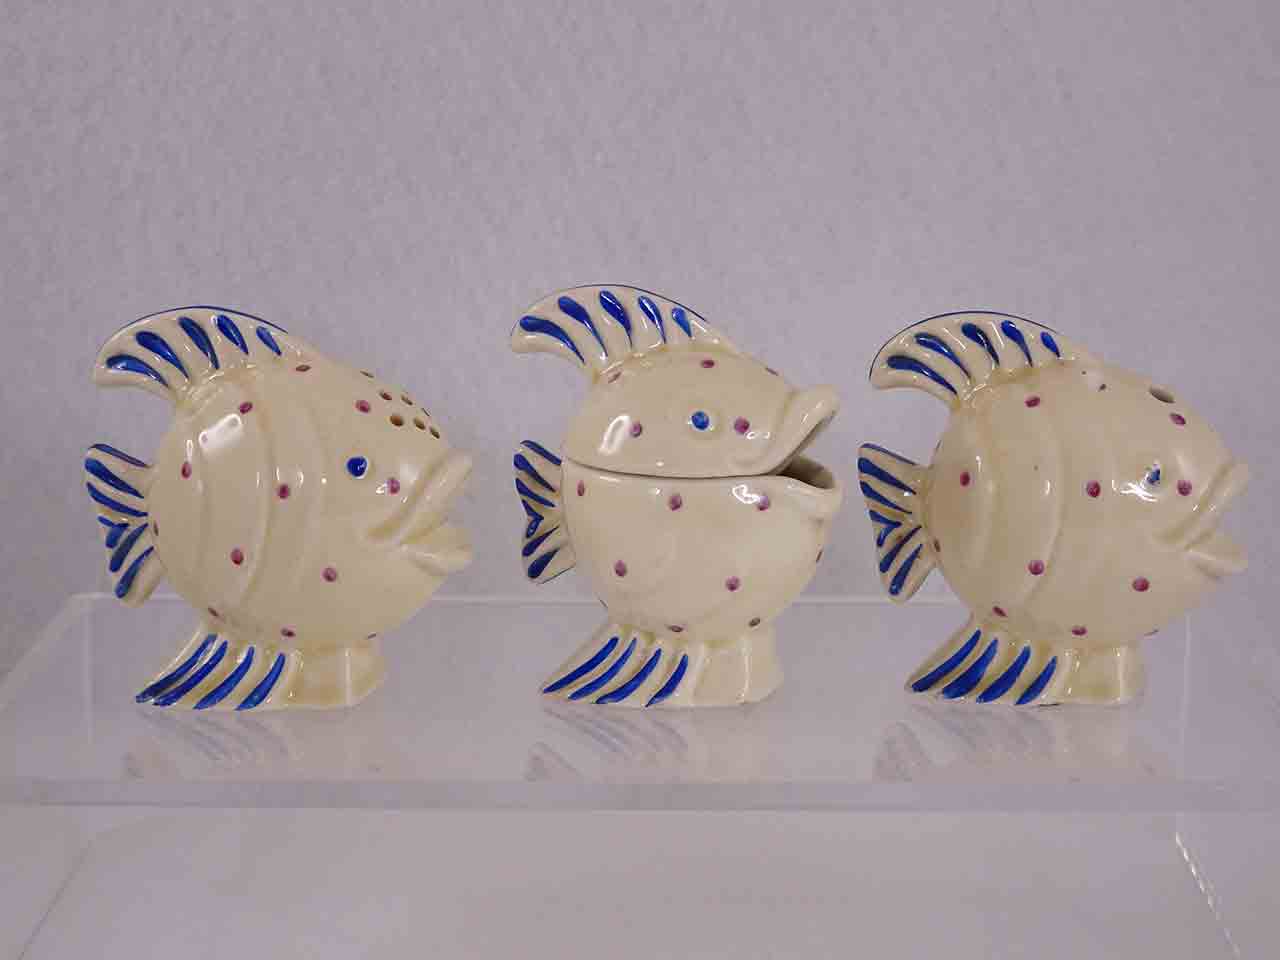 Fish condiment made by Wilkinson from England salt and pepper shakers and condiment